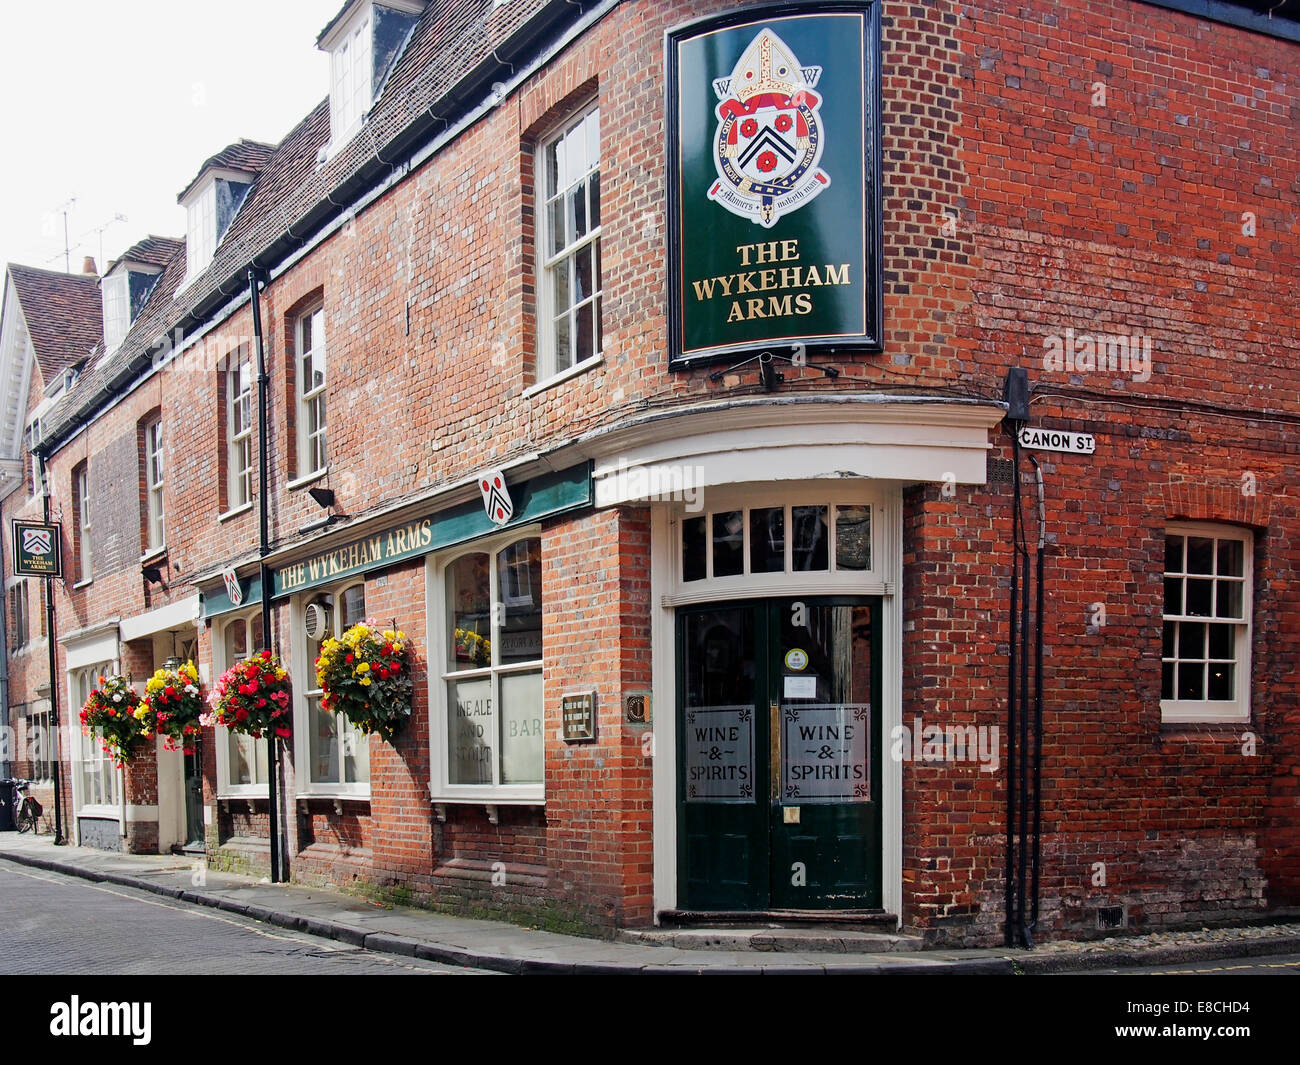 The Wykeham Arms in Kingsgate Street, Winchester, Hampshire is a well know pub, hotel and restaurant with celebrity customers. Stock Photo